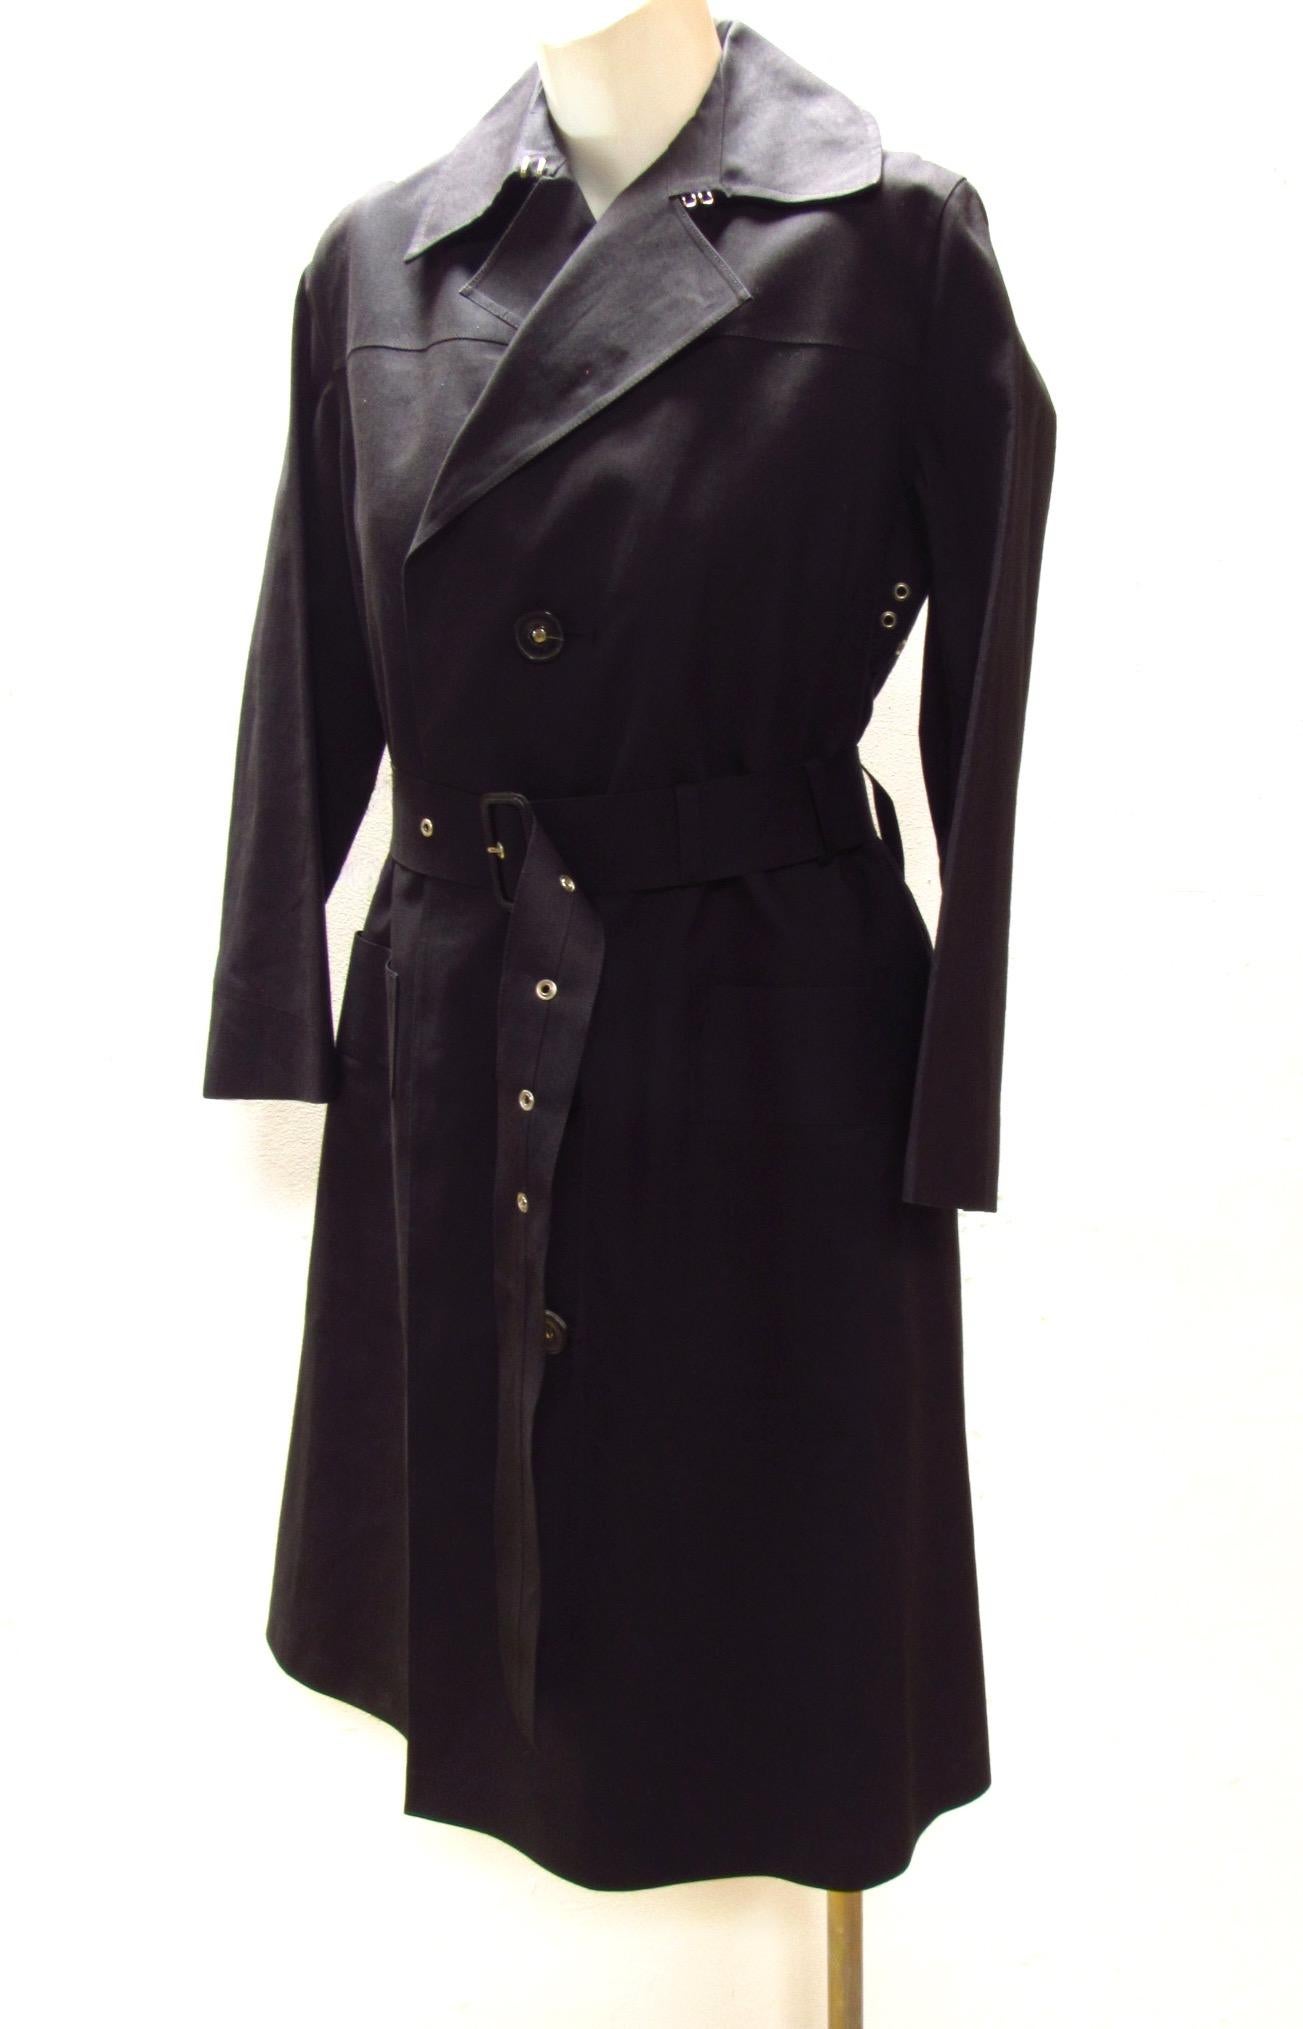 Black cotton belted button-down raincoat from vintage Y's is lined with a 100% wool detachable lining and offers hook and eye fasteners at collar to keep you cozy when the weather won't. Two front pockets.